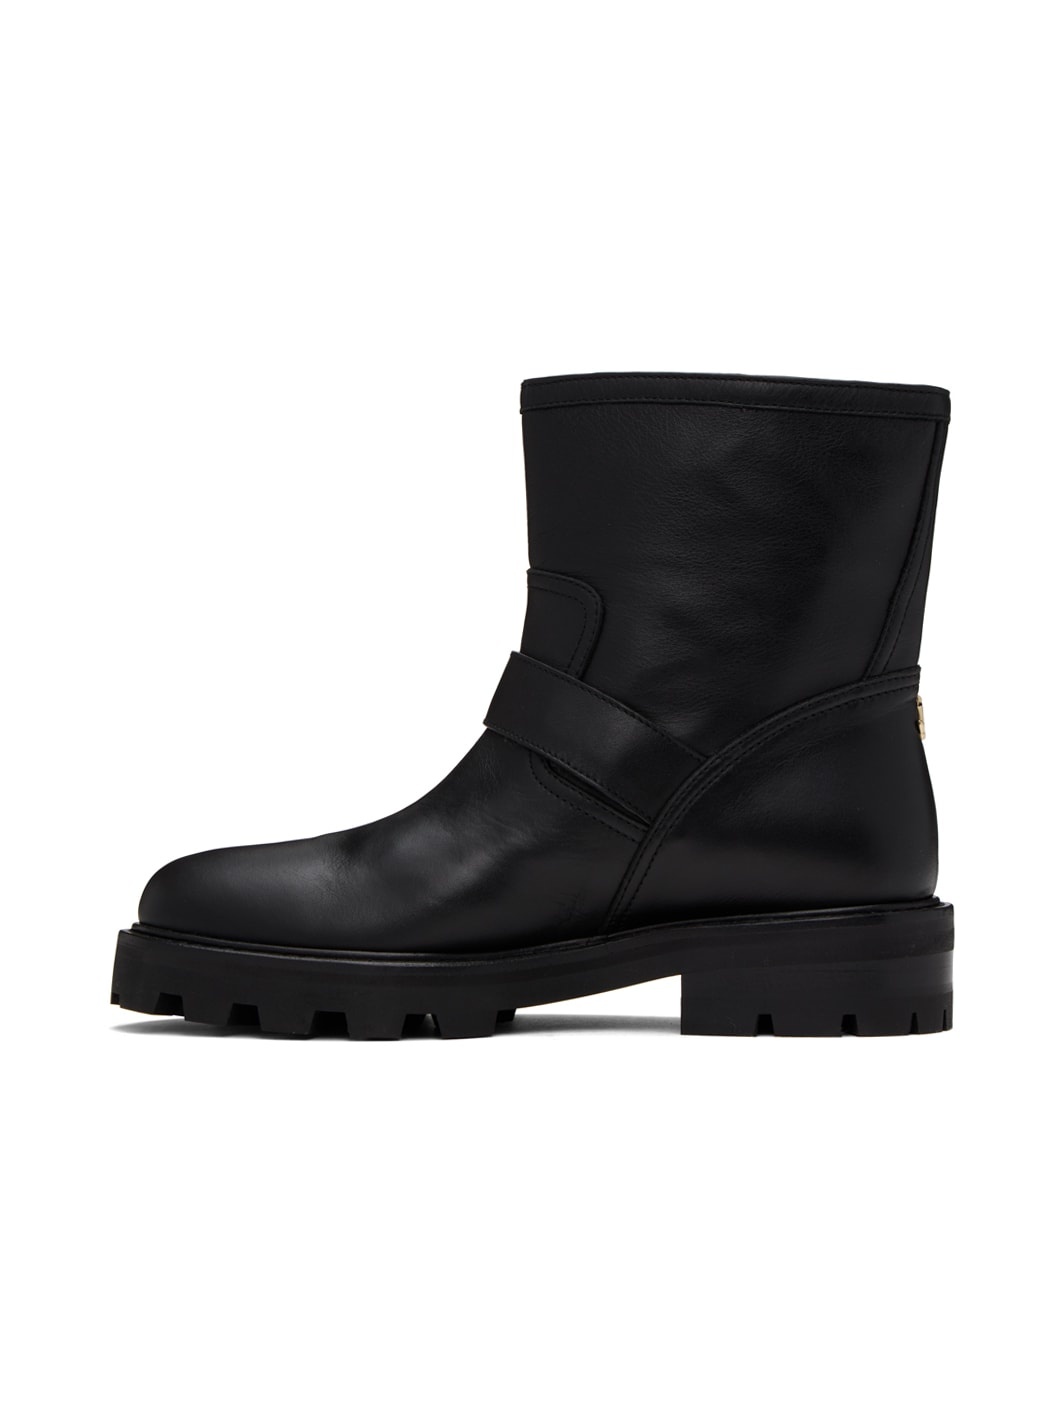 Black Youth II Boots - 3